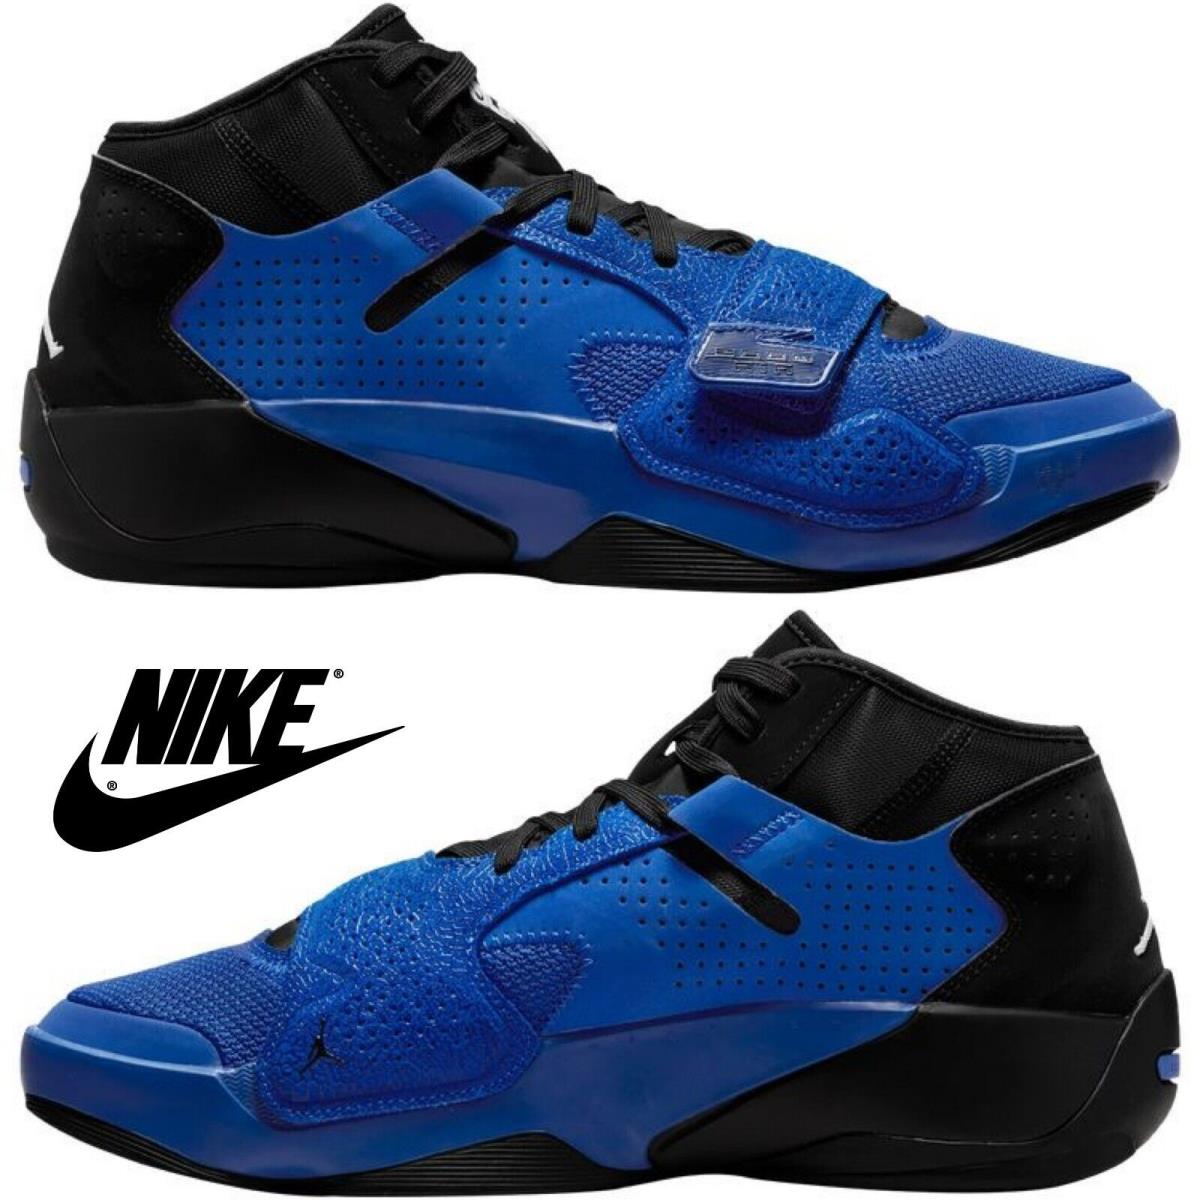 Nike Zion 2 Men`s Basketball Sneakers Comfort Casual Sport Lightweight Shoes